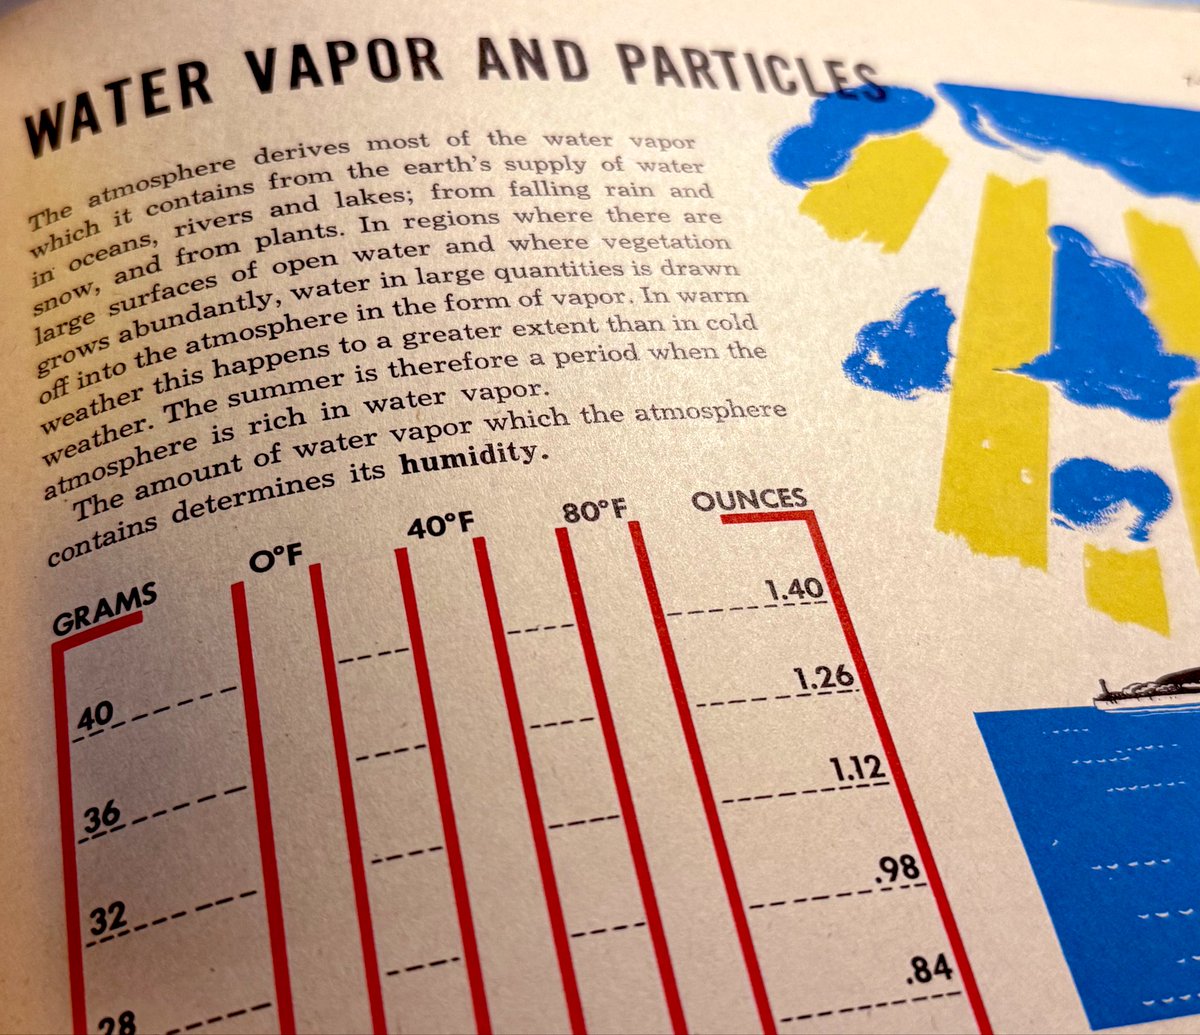 I just used a 1940’s-era @CivilAirPatrol Cadet handbook to help my 6th grader out with his #Science homework. (He’s learning about the atmosphere)

The Office of Civil Defense really got their money’s worth out of this outfit. #goflyCAP